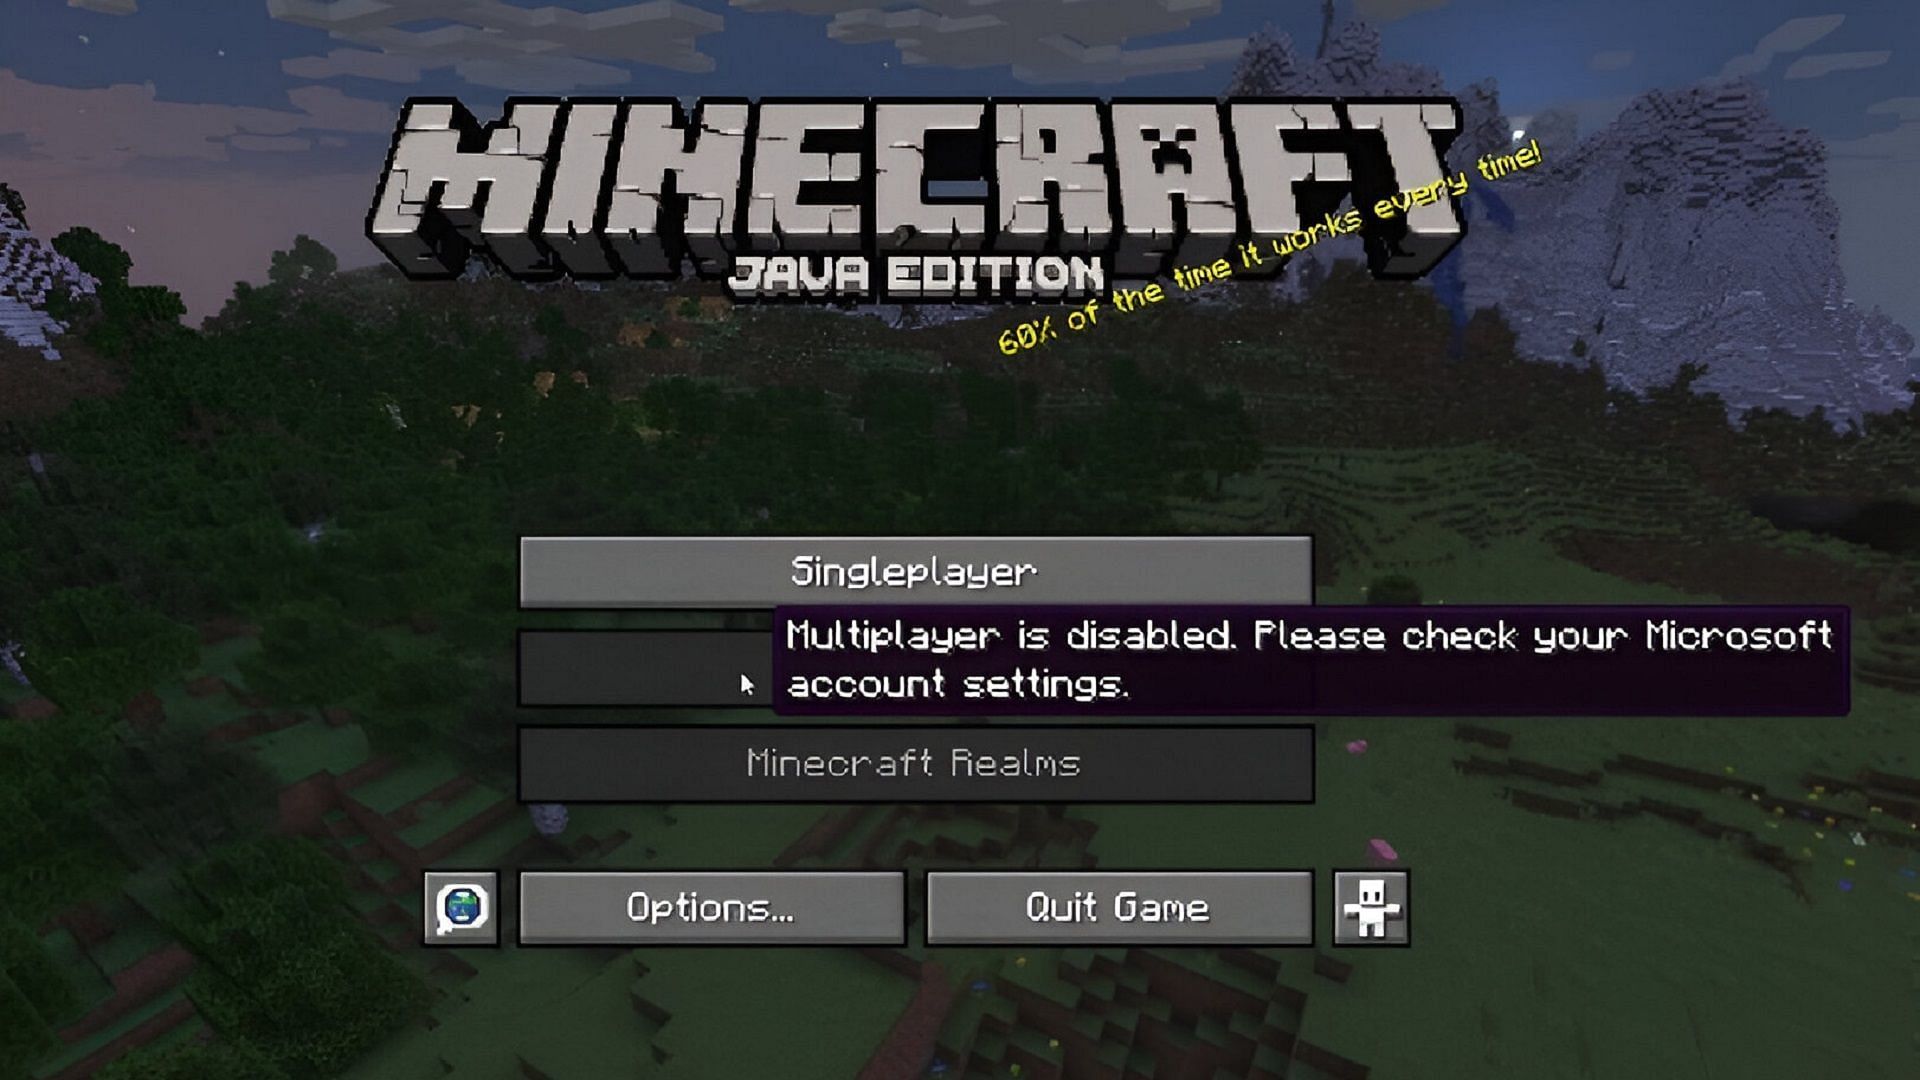 How can I activate Multiplayer on my kids account in Minecraft on